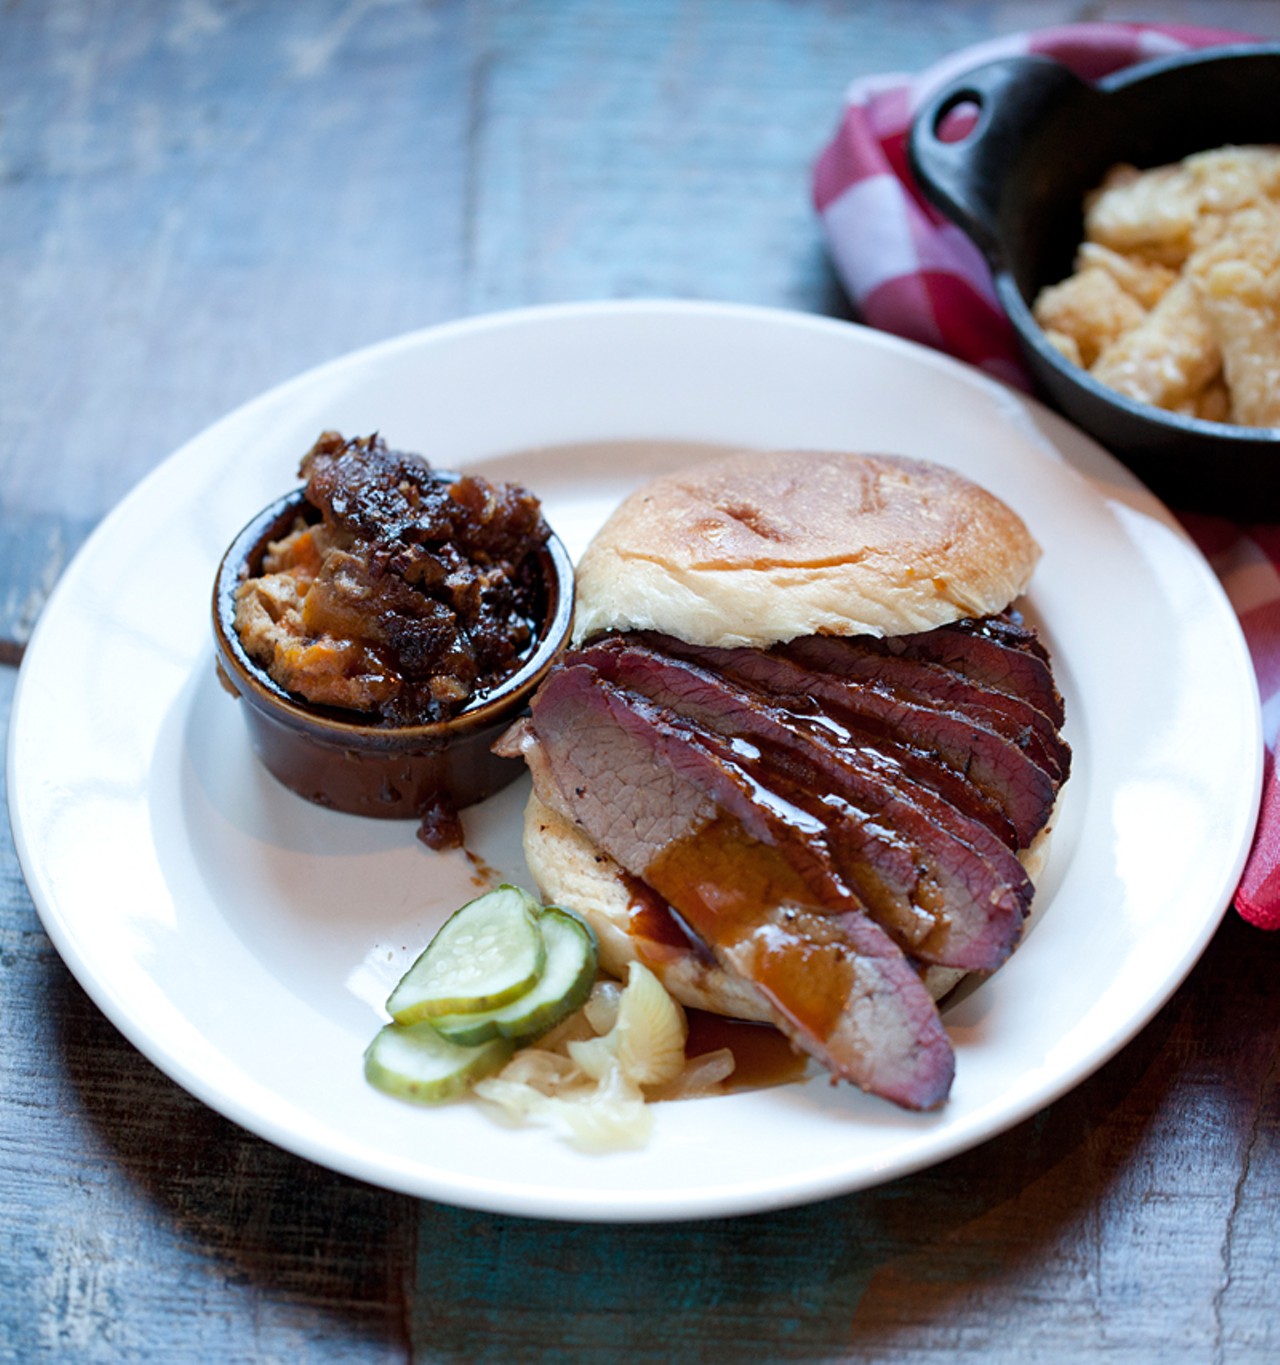 The smoked-brisket sandwich is served with housemade pickles and onion marmalade. It's shown here with sides of sweet-potato casserole and macaroni & cheese.